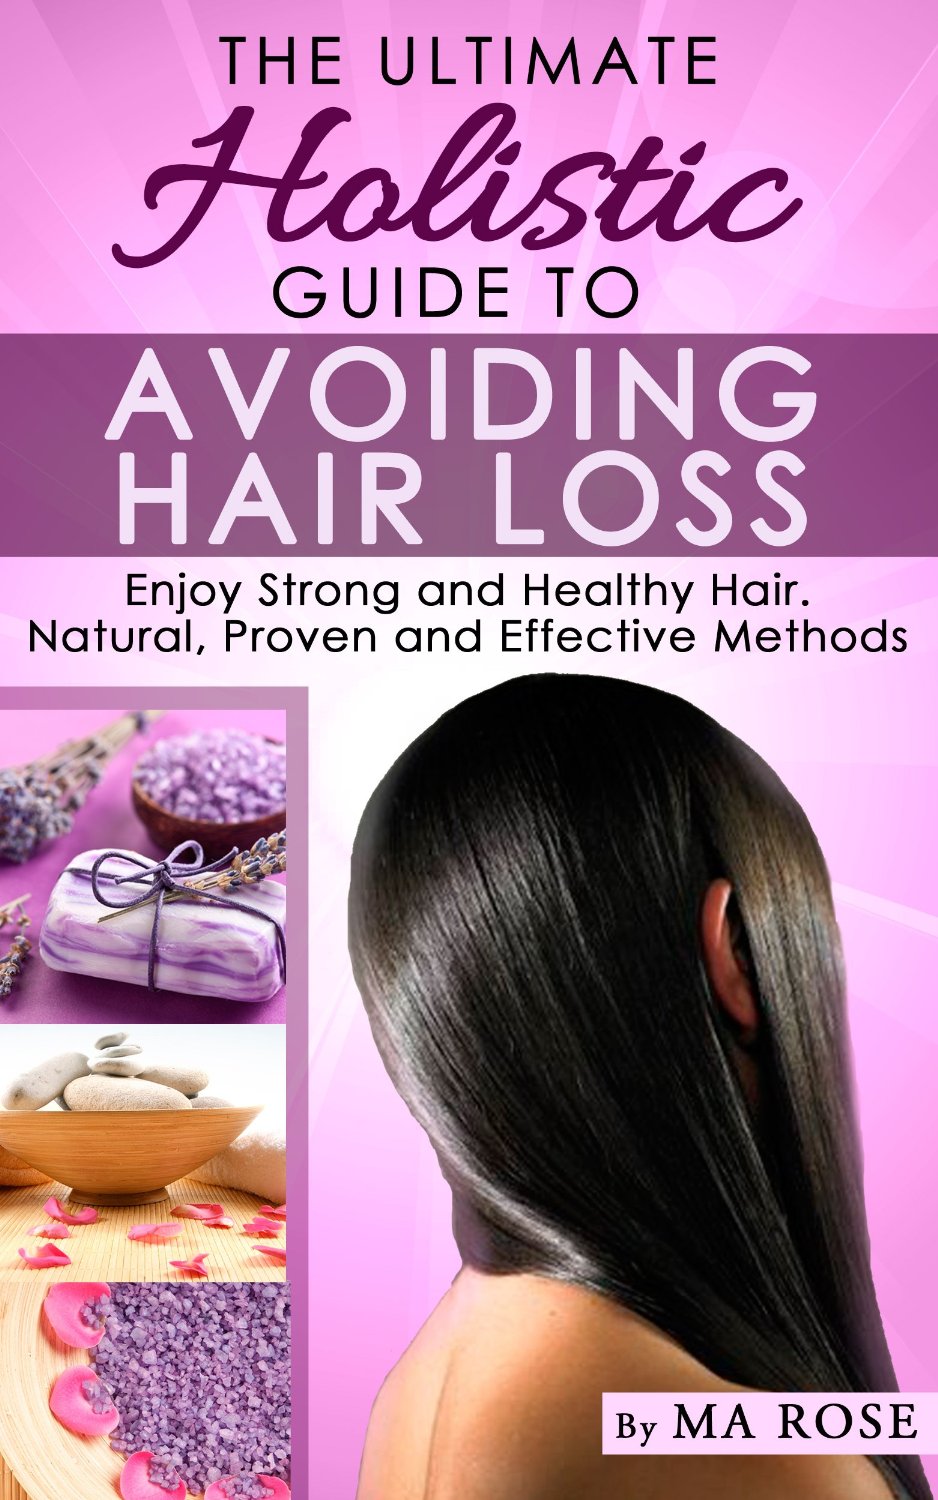 The Ultimate Holistic Guide to Avoiding Hair Loss by Ma Rose